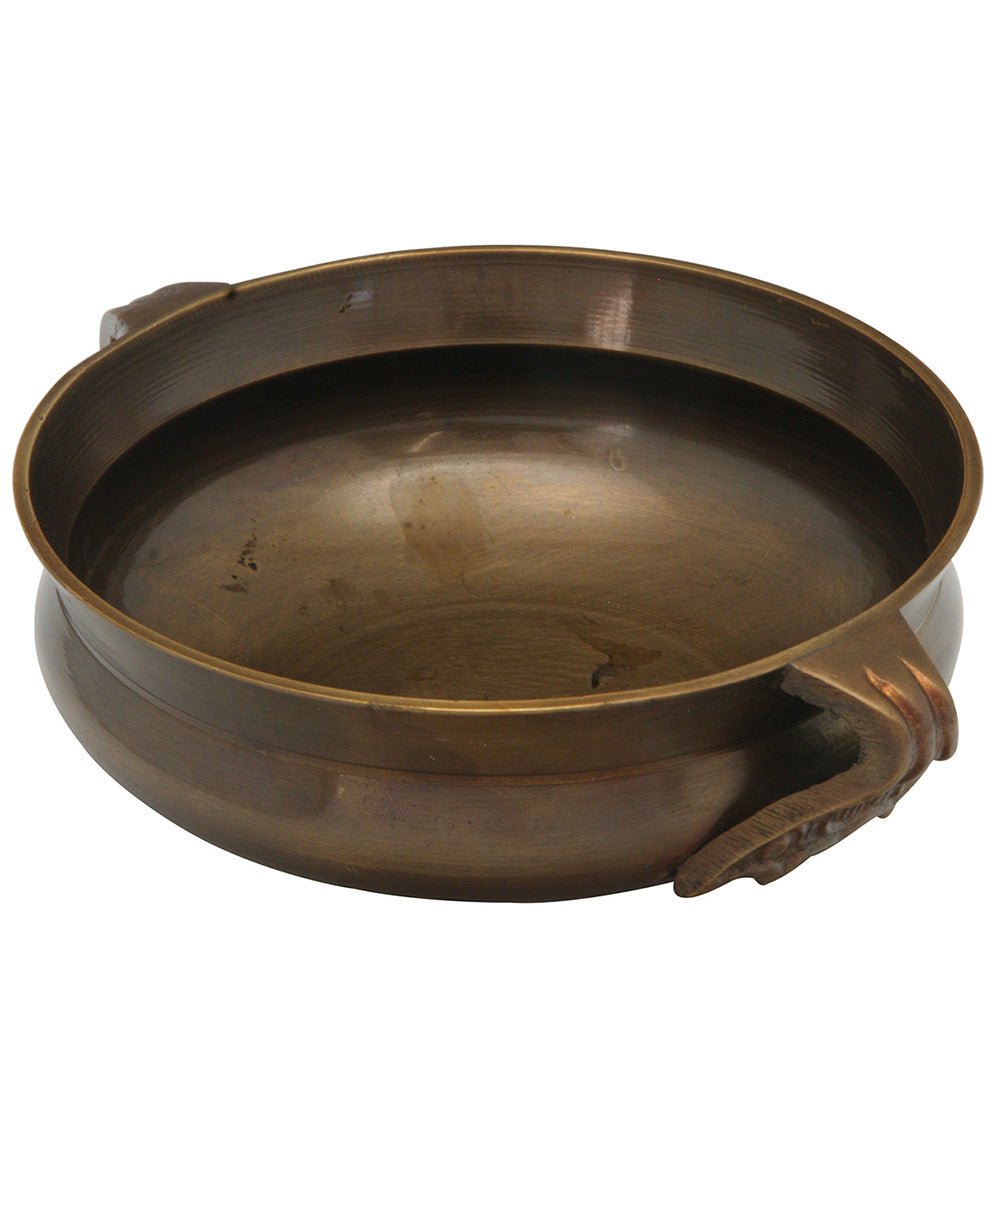 Brass Offering Bowl with Handles - Bowls